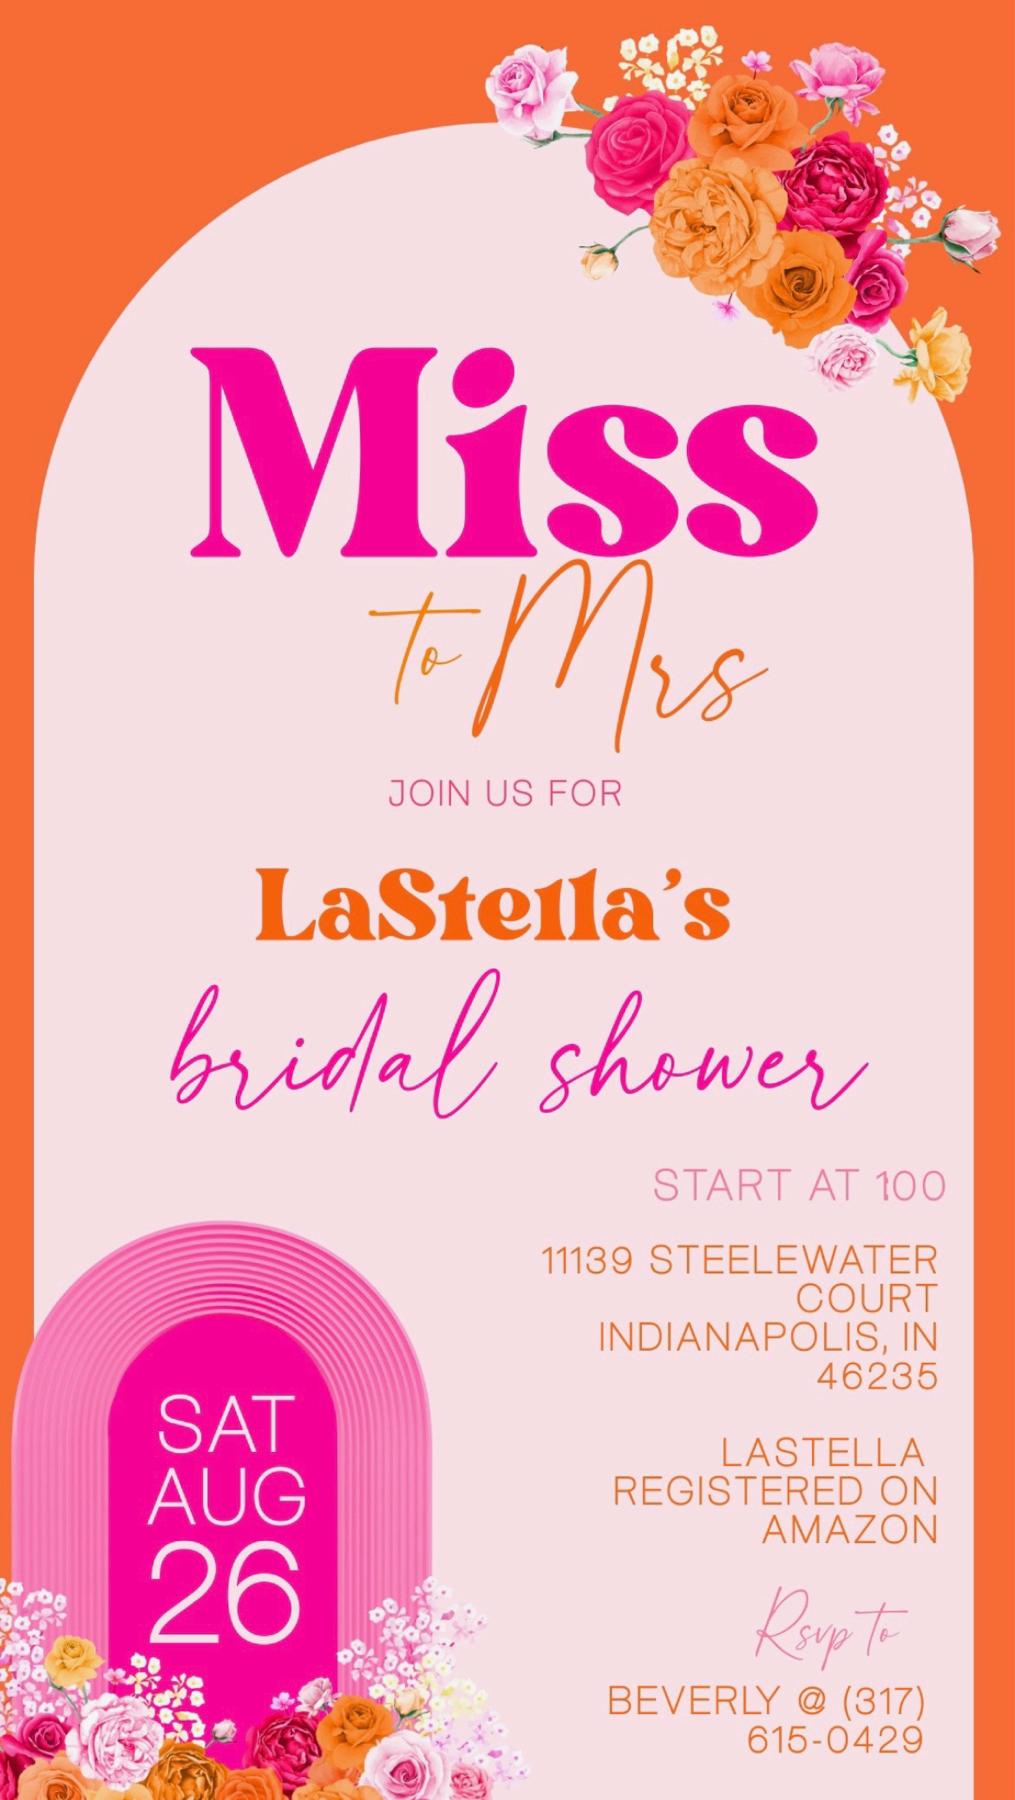 All are invited to Stella’s Bridal Shower